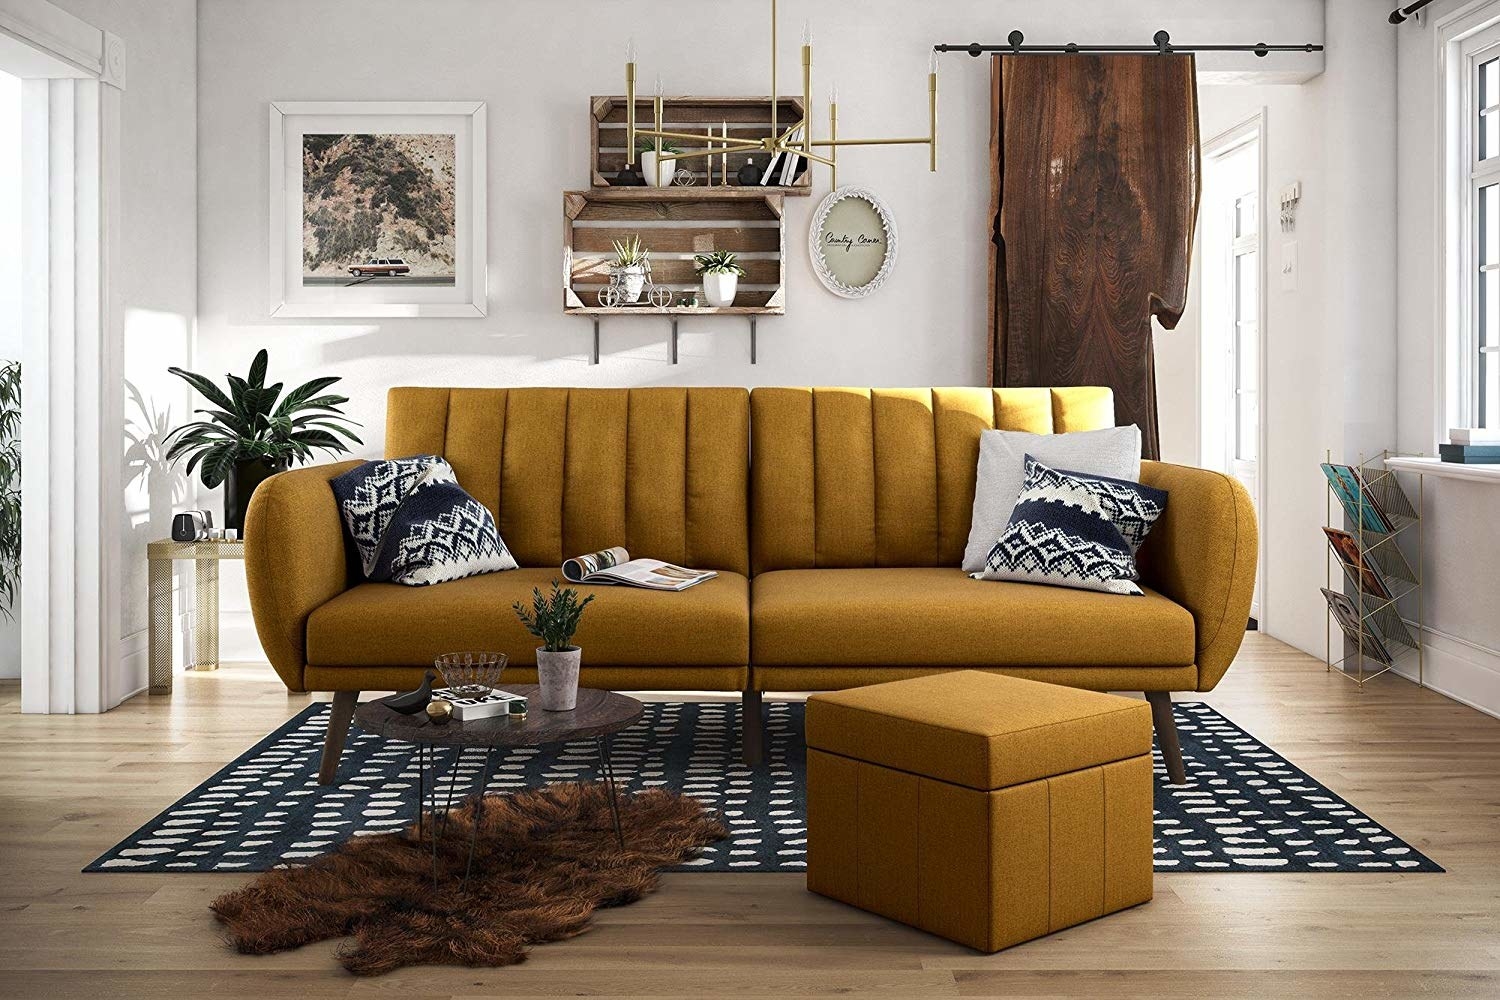 Plush sofa with wooden legs